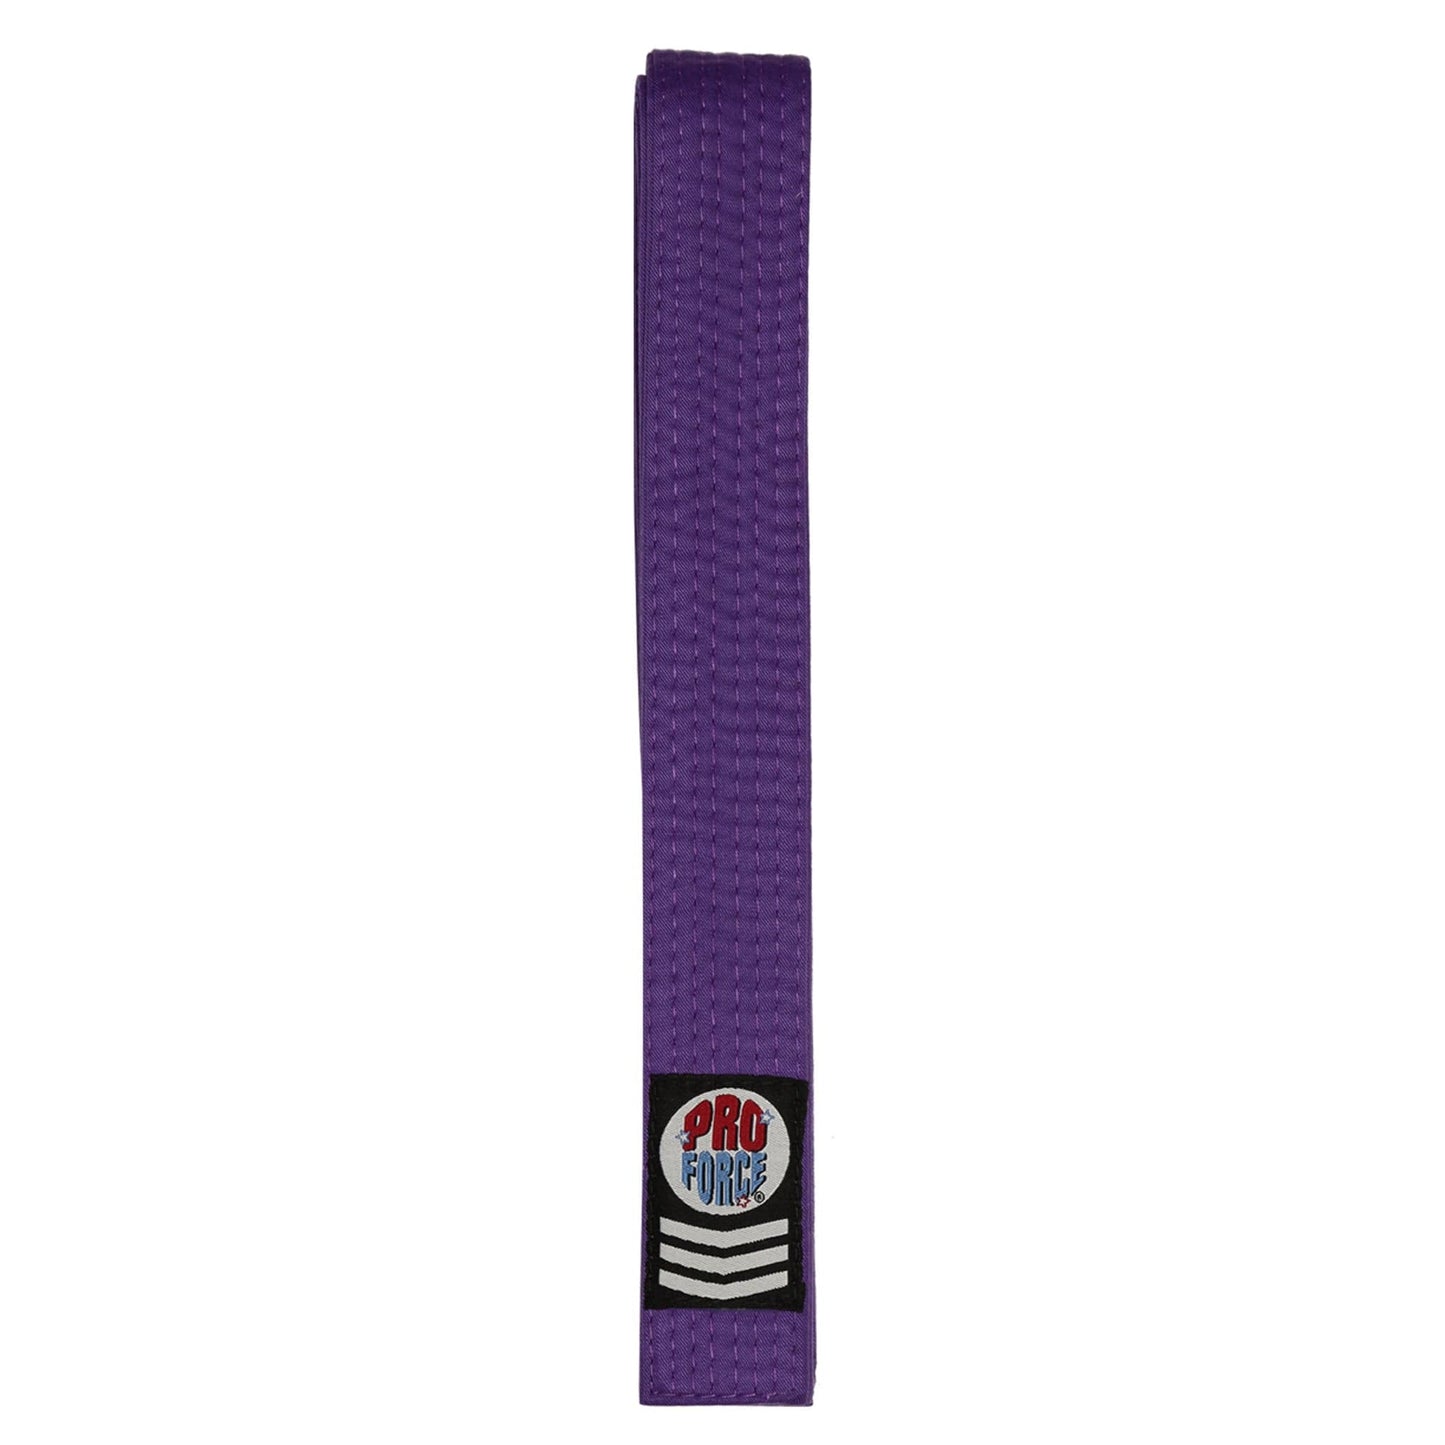 EclipseMartialArtsSupplies sporting goods Purple / 0 child small ProForce II 1.5 inch Double Wrap Solid Karate Belts